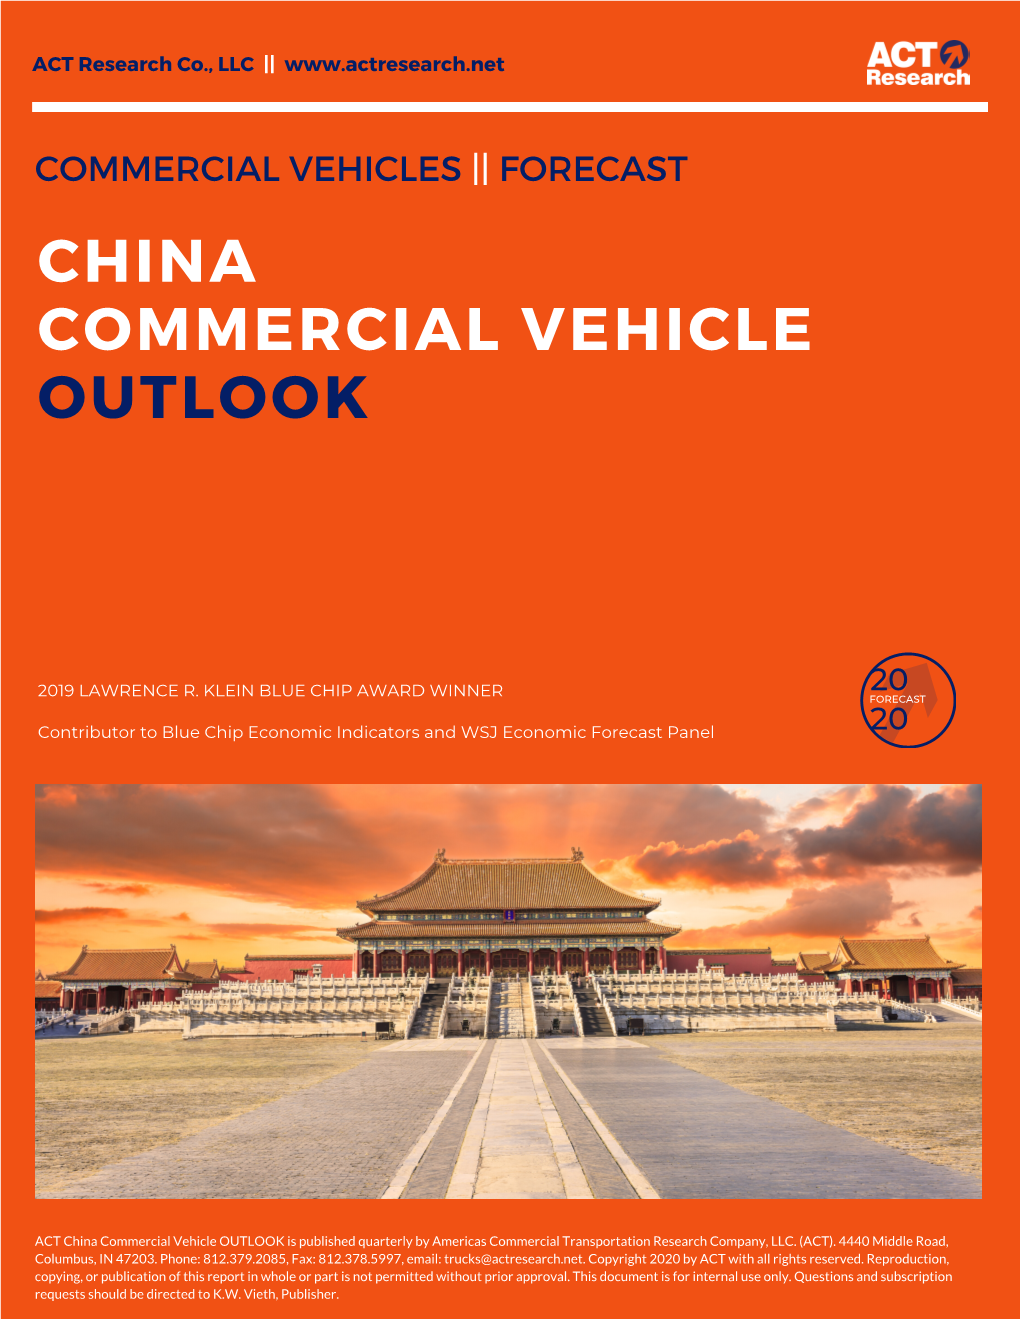 China Commercial Vehicle Outlook